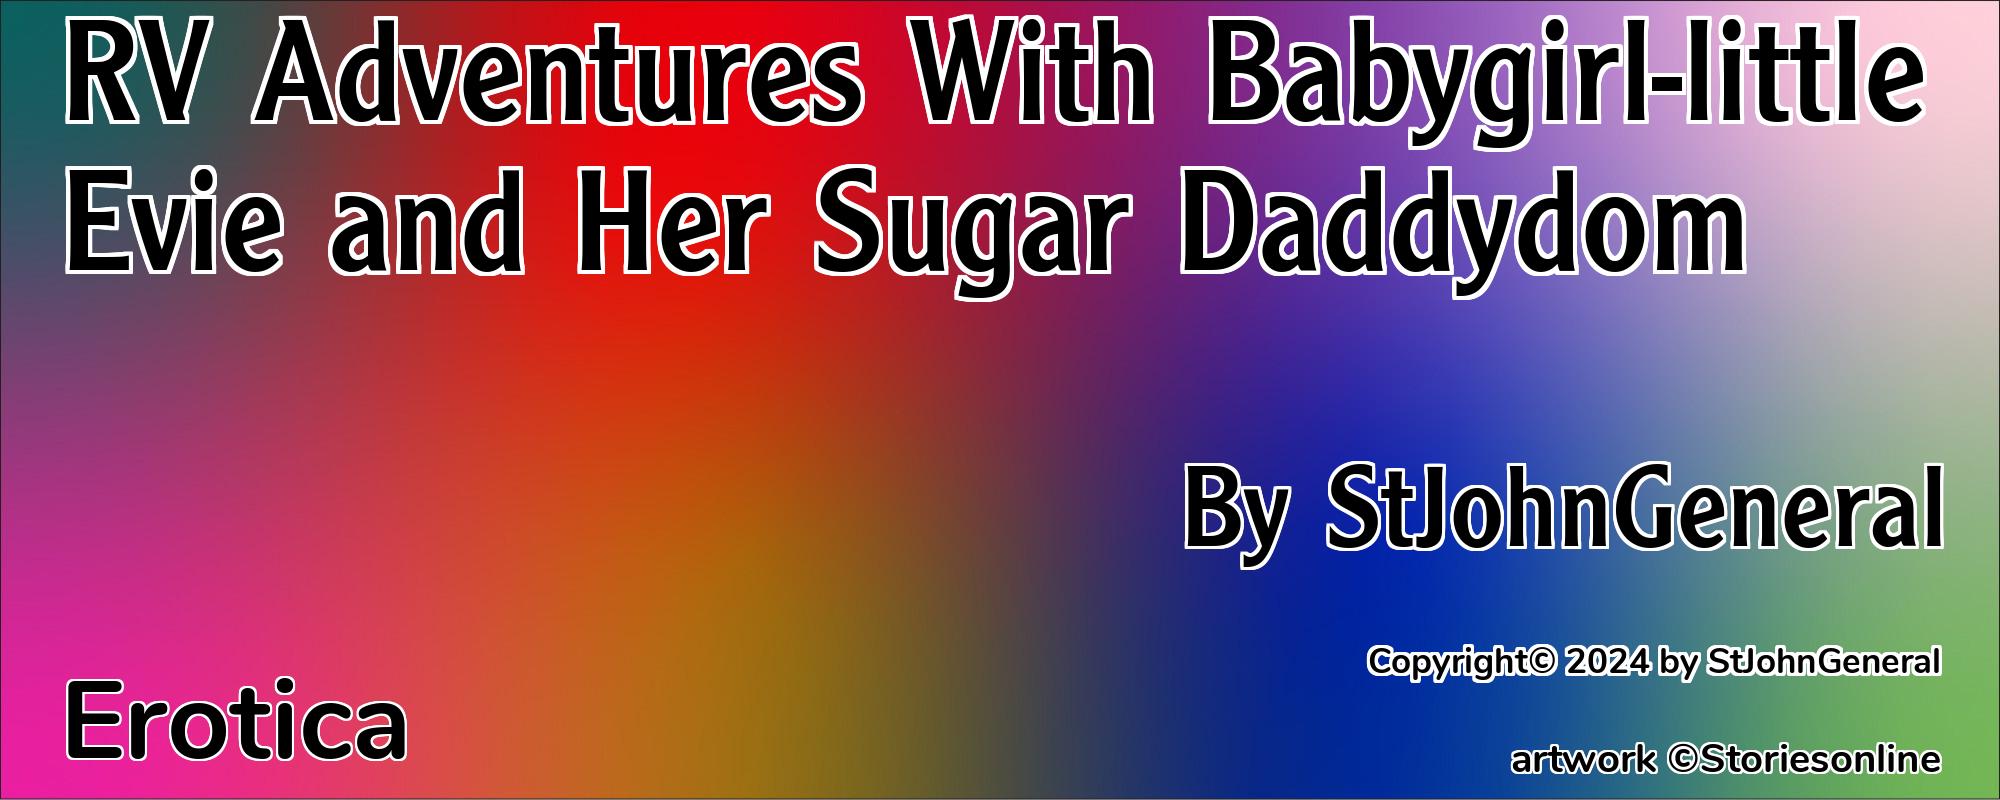 RV Adventures With Babygirl-little Evie and Her Sugar Daddydom - Cover